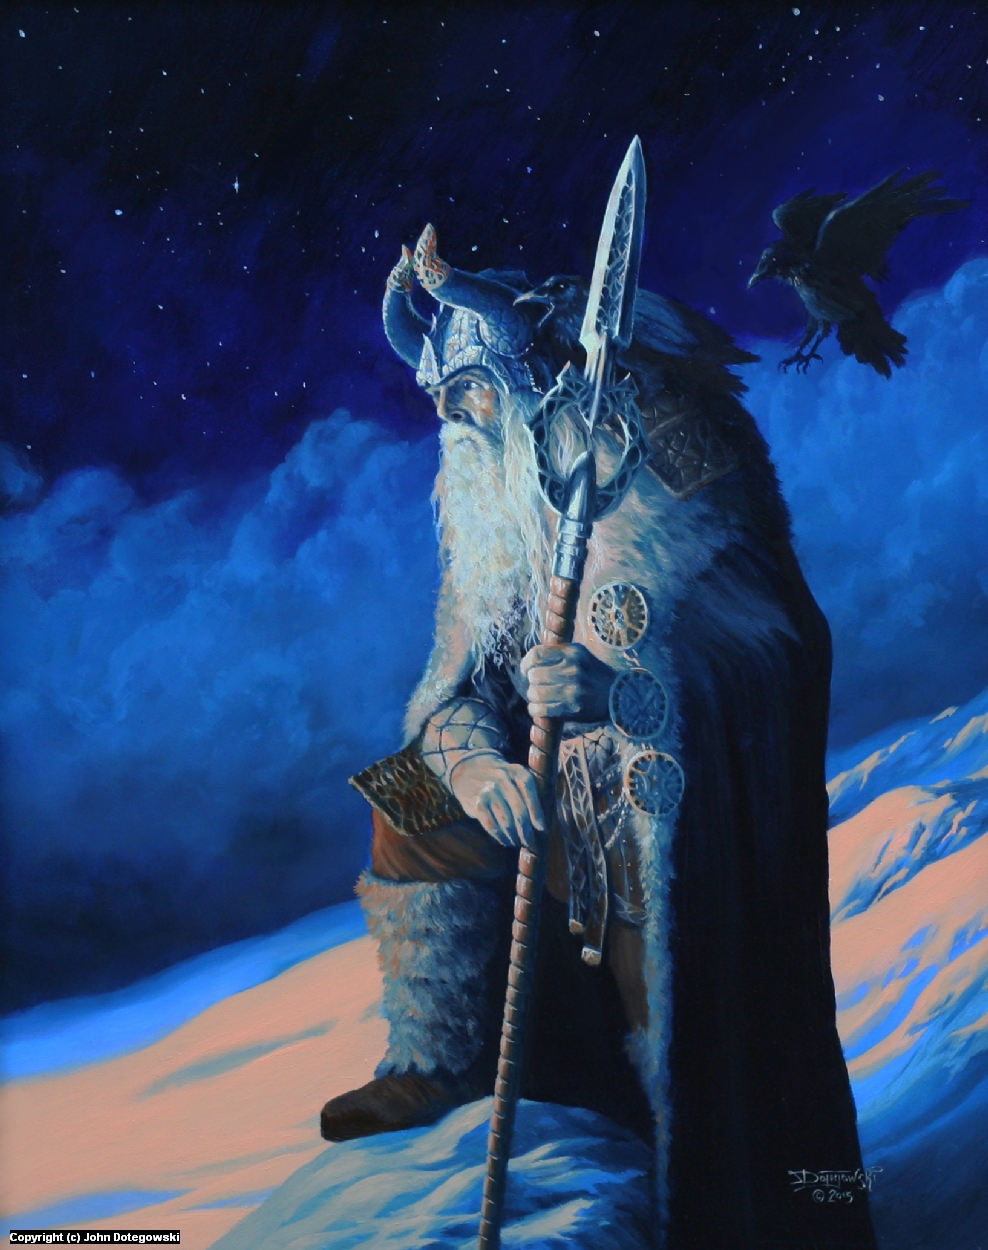 Infected By Art » Art Gallery » John Dotegowski » Odin Allfather in